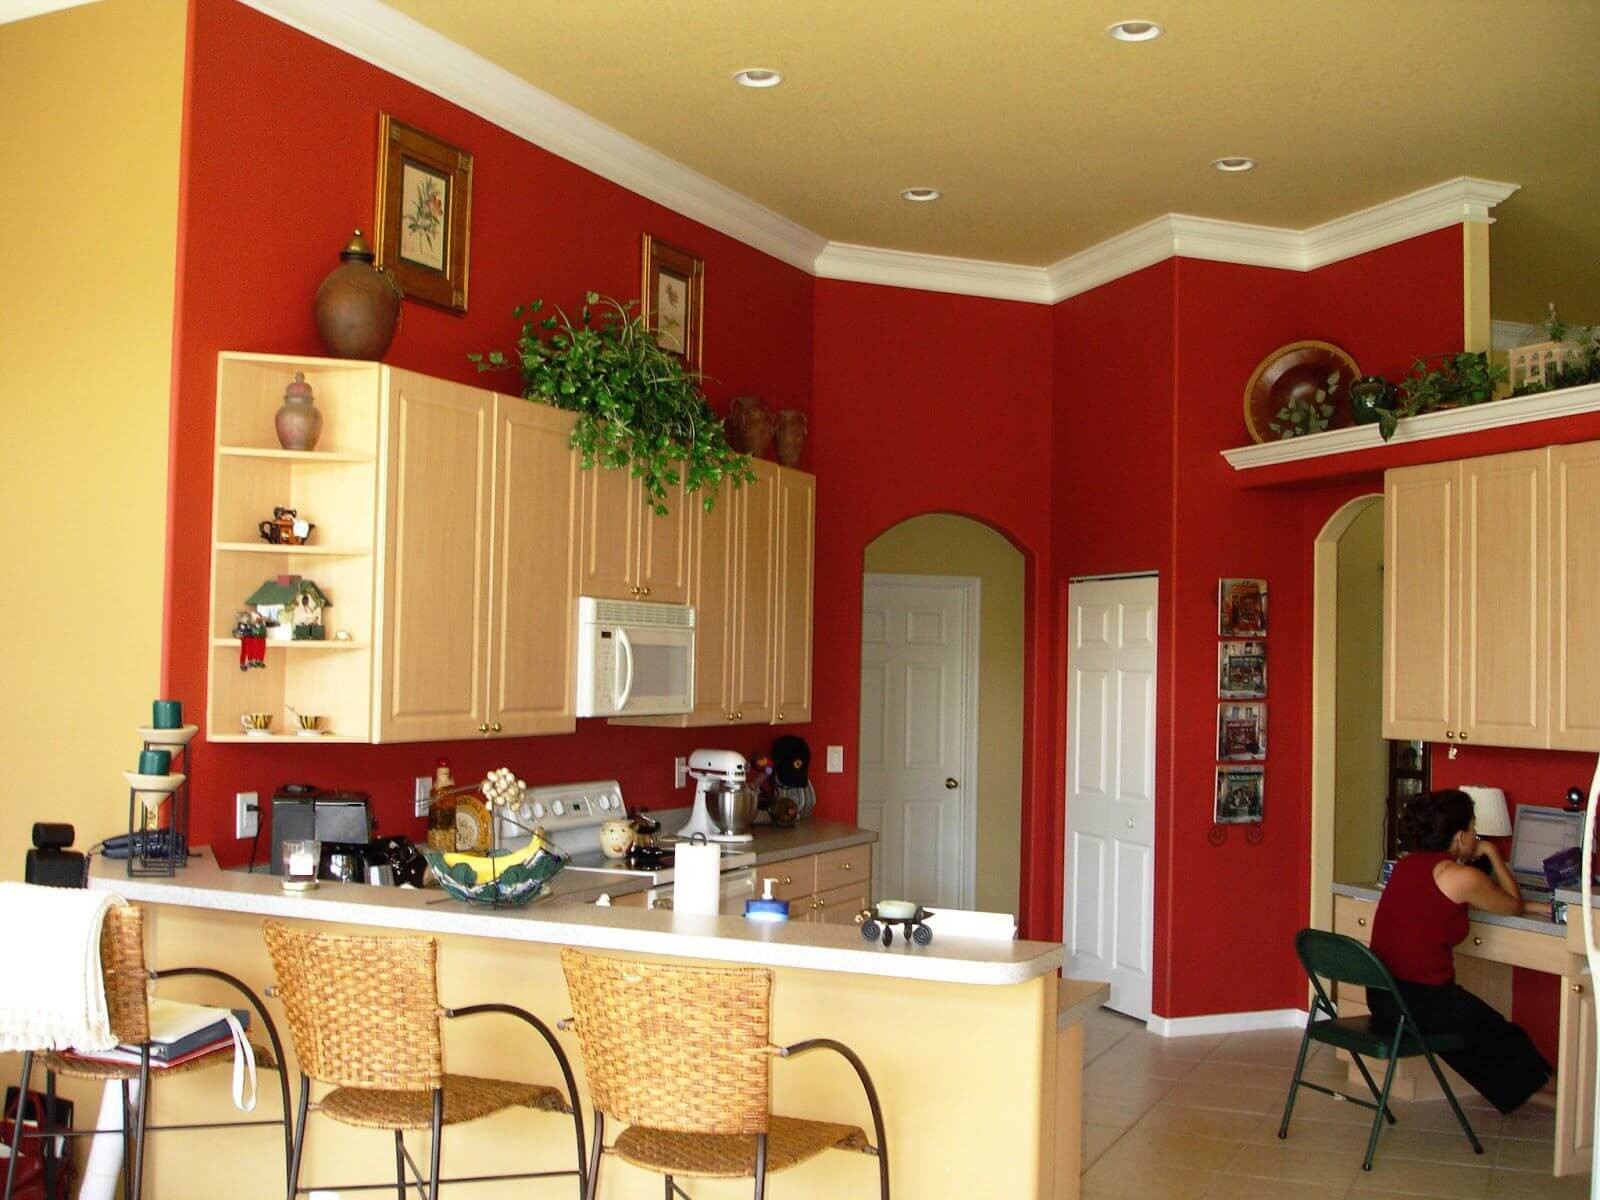 Wall Colors For Kitchen
 Trending Kitchen Wall Colors For The Year 2019